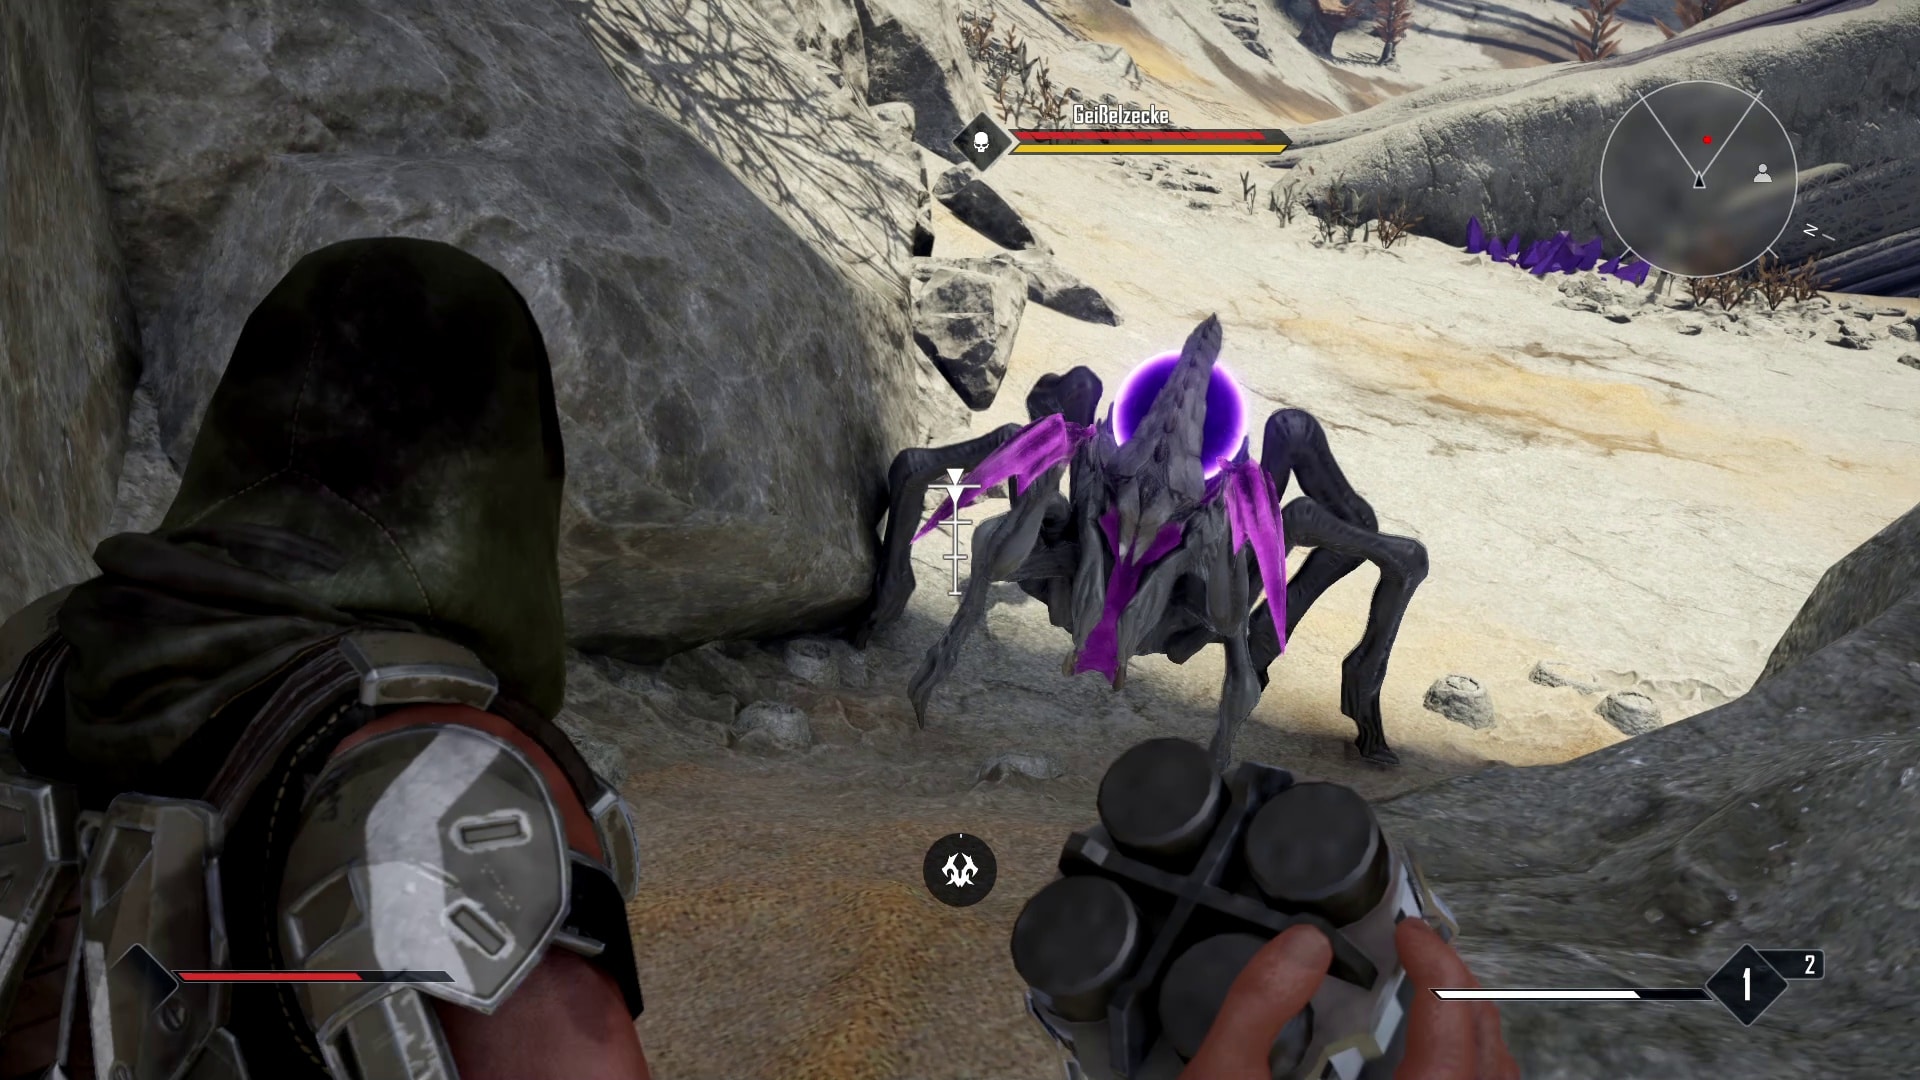 The purple Skyanids are extremely strong at first; the skull next to the life bar indicates that this spider will finish you off in no time.